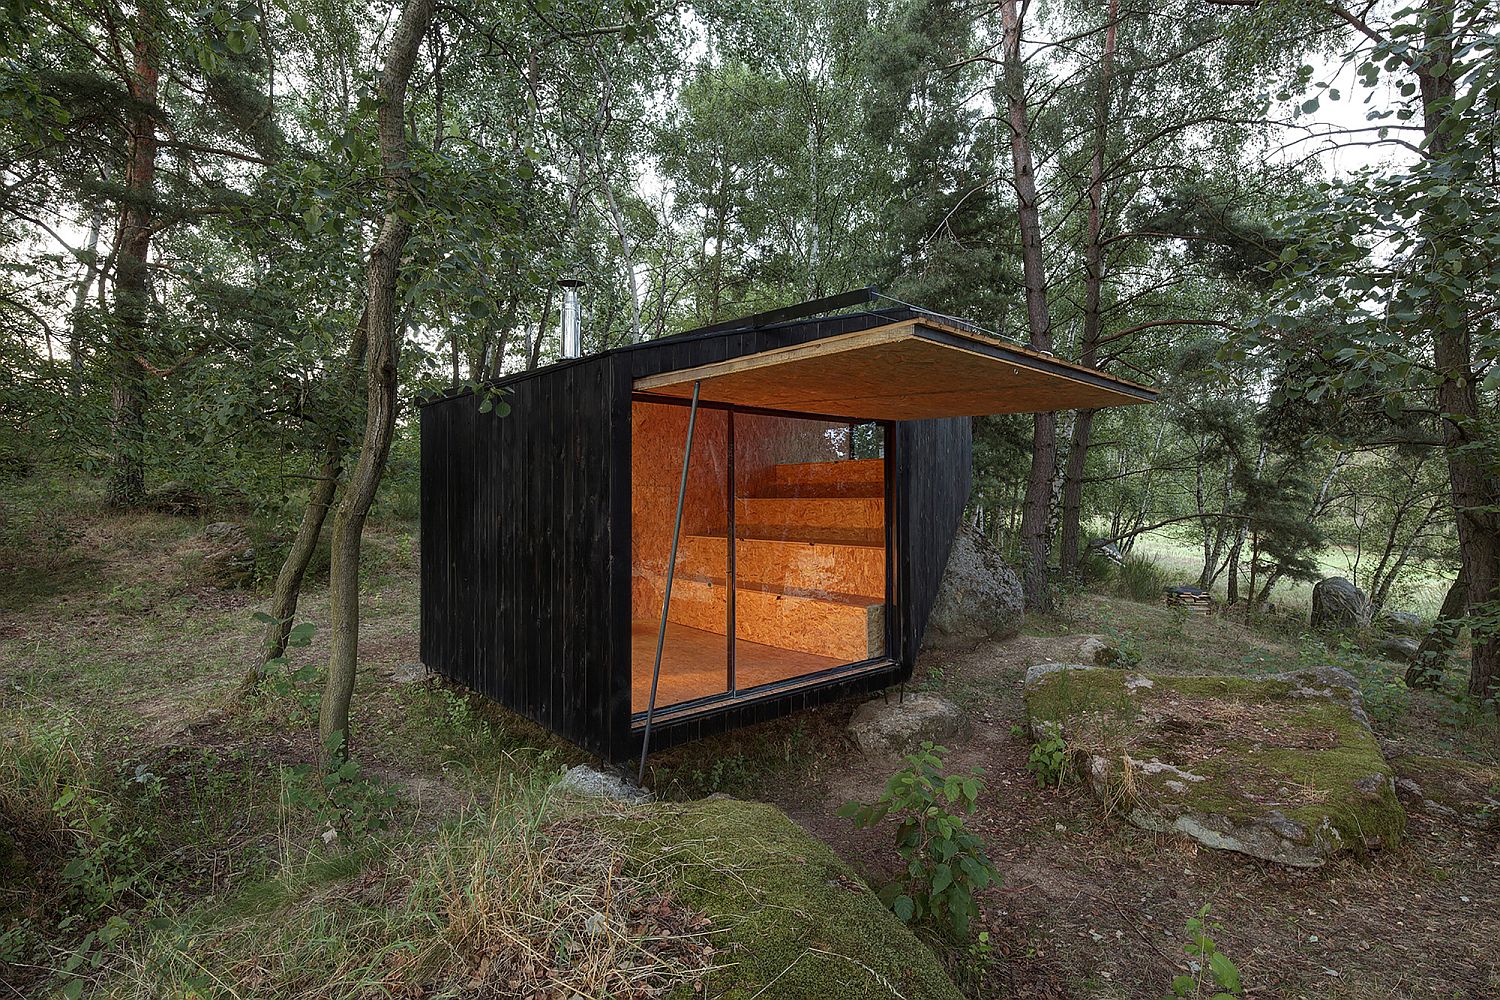 Opening up the cabin offers wonderful views of the woods outside